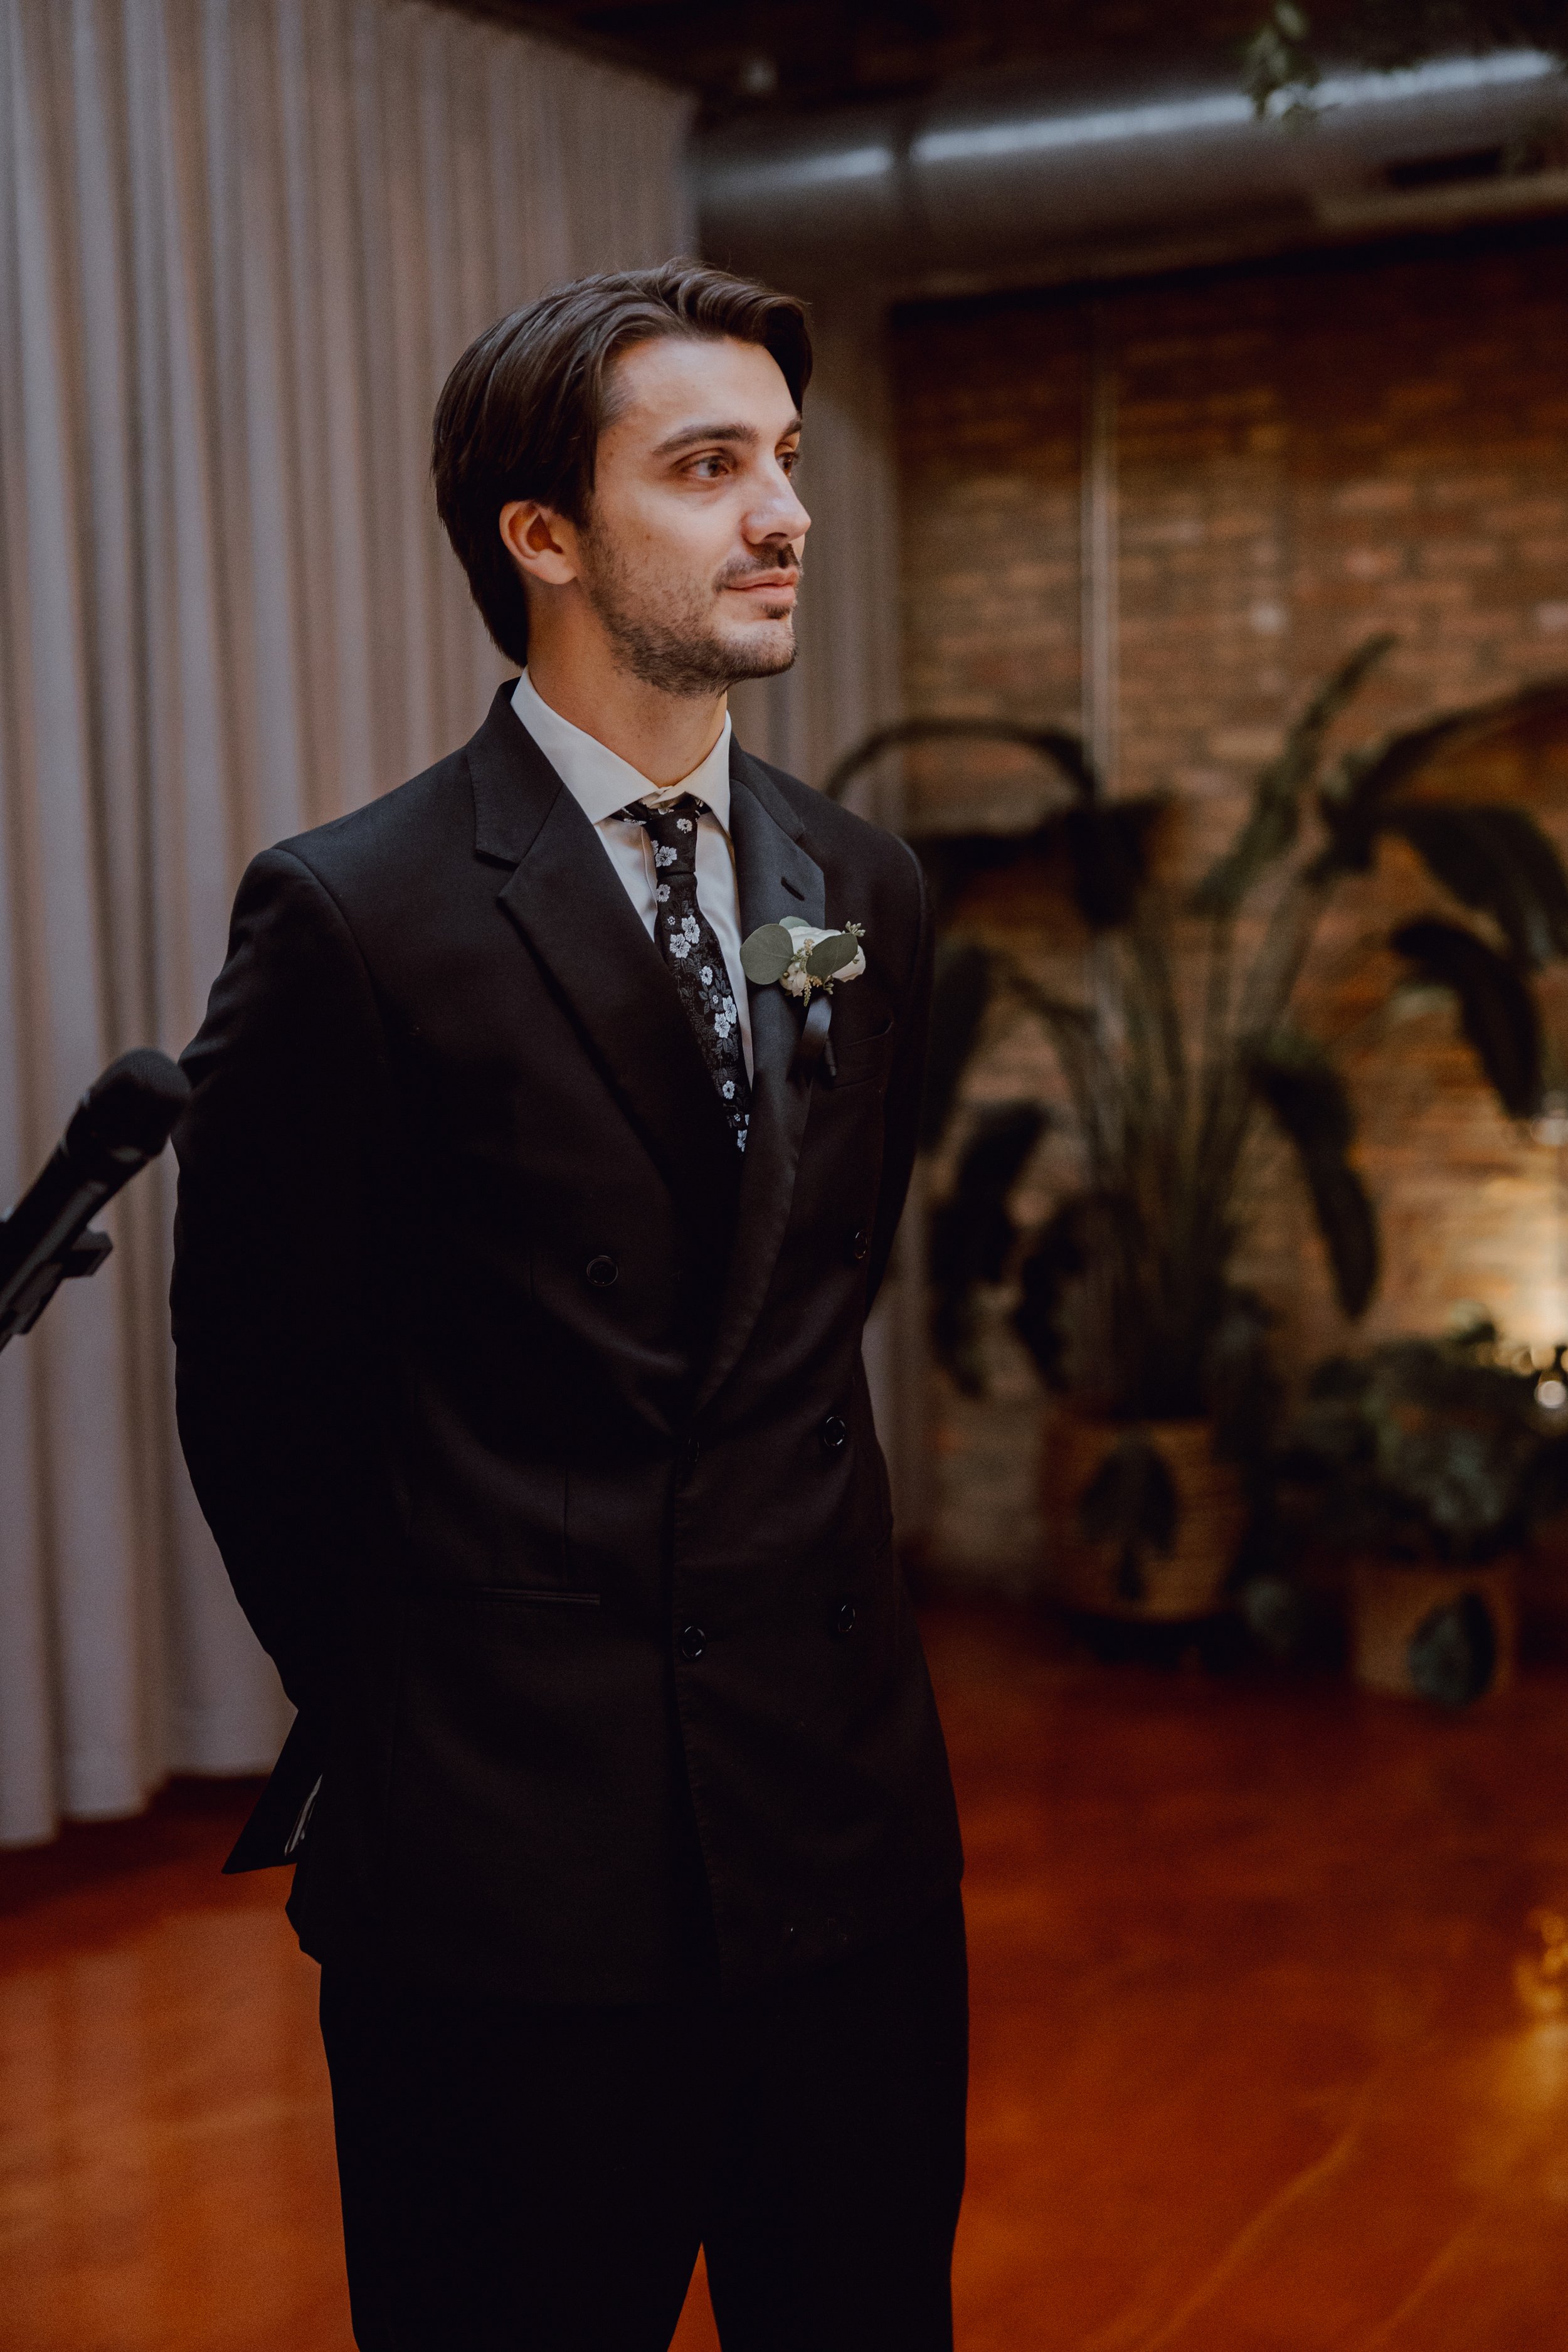 CHICAGO-WEDDING-PHOTOGRAPHY-BY-ARTISTS-AND-STORIES-BY-MEGAN-SAUL-CEREMONY (17 of 85).jpg